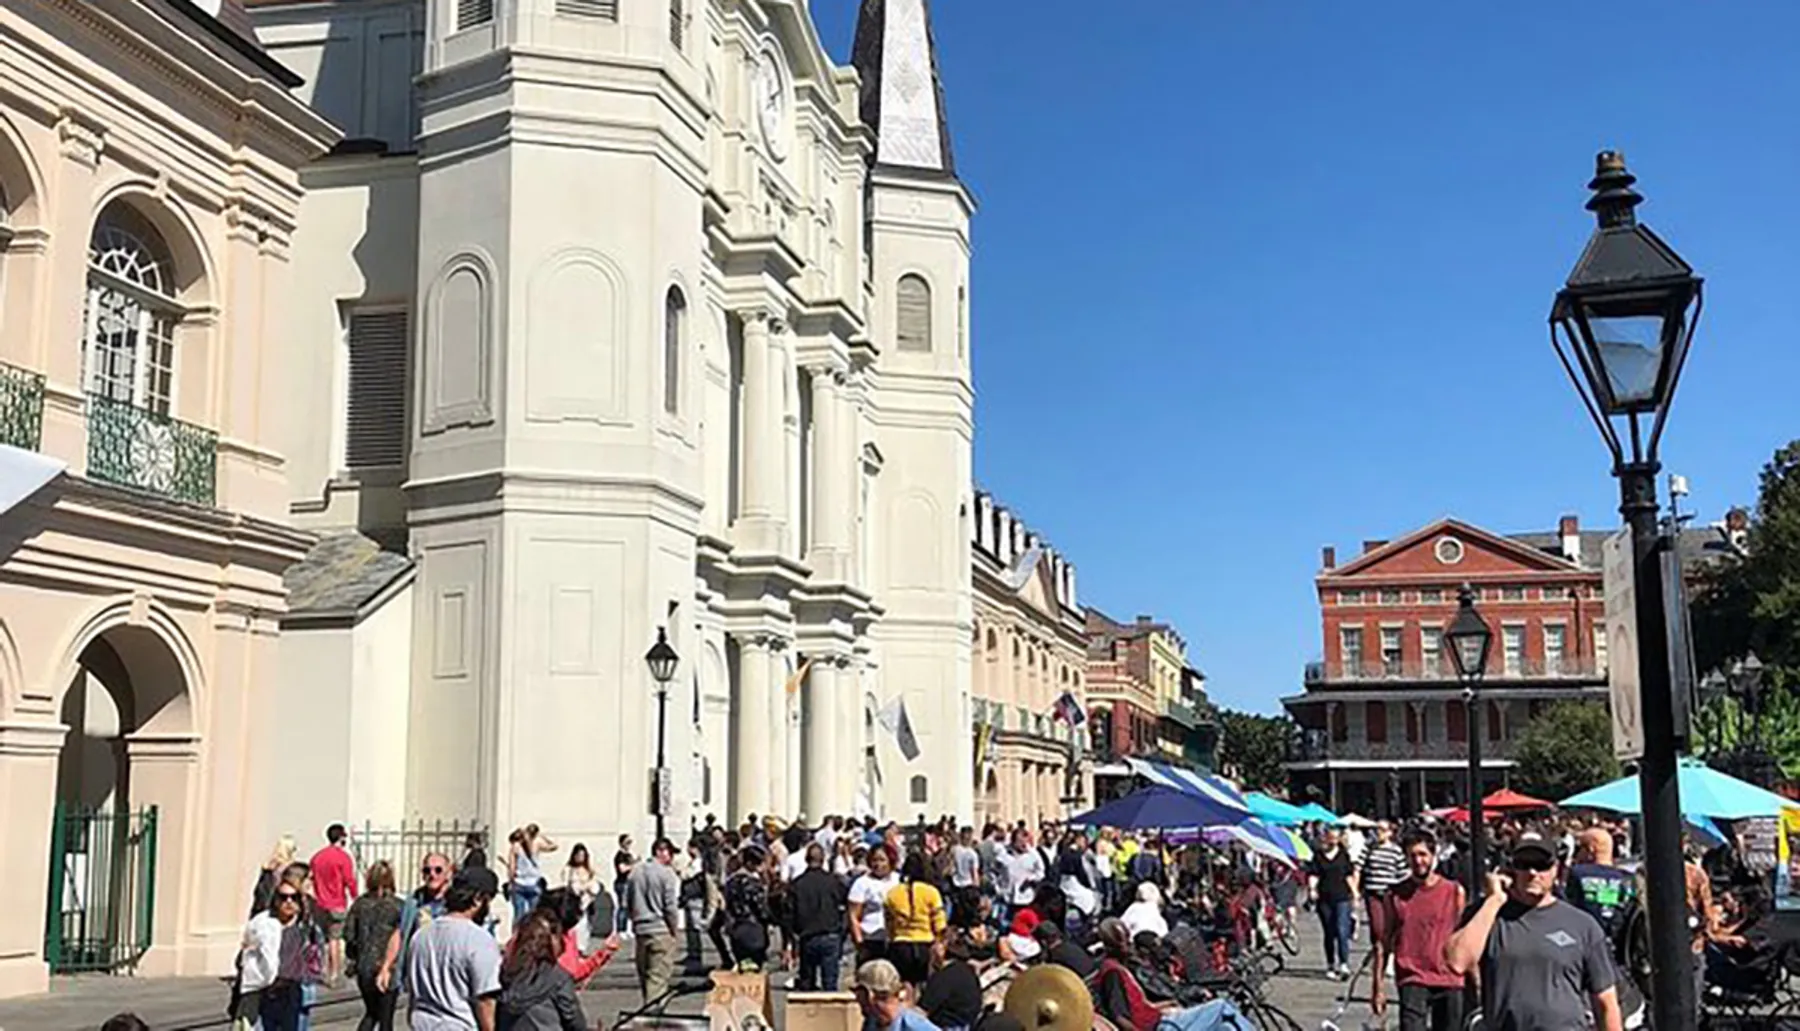 This image shows a bustling street scene with a crowd of people and street vendors in front of an iconic church building with historical architecture, typical of a lively urban tourist destination.